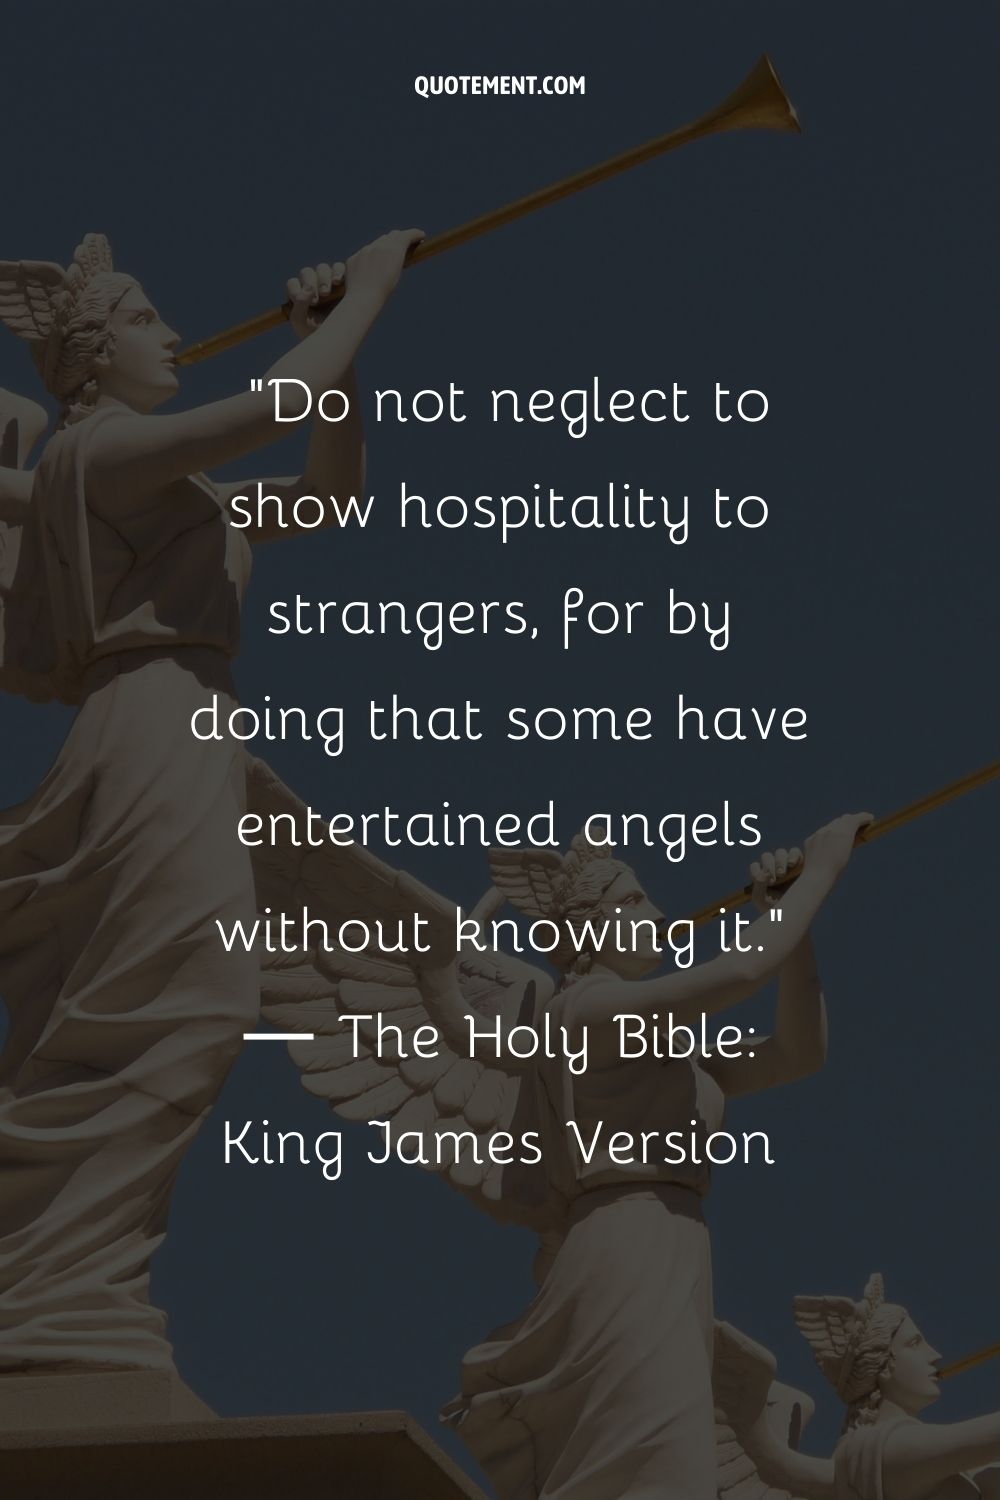 Do not neglect to show hospitality to strangers